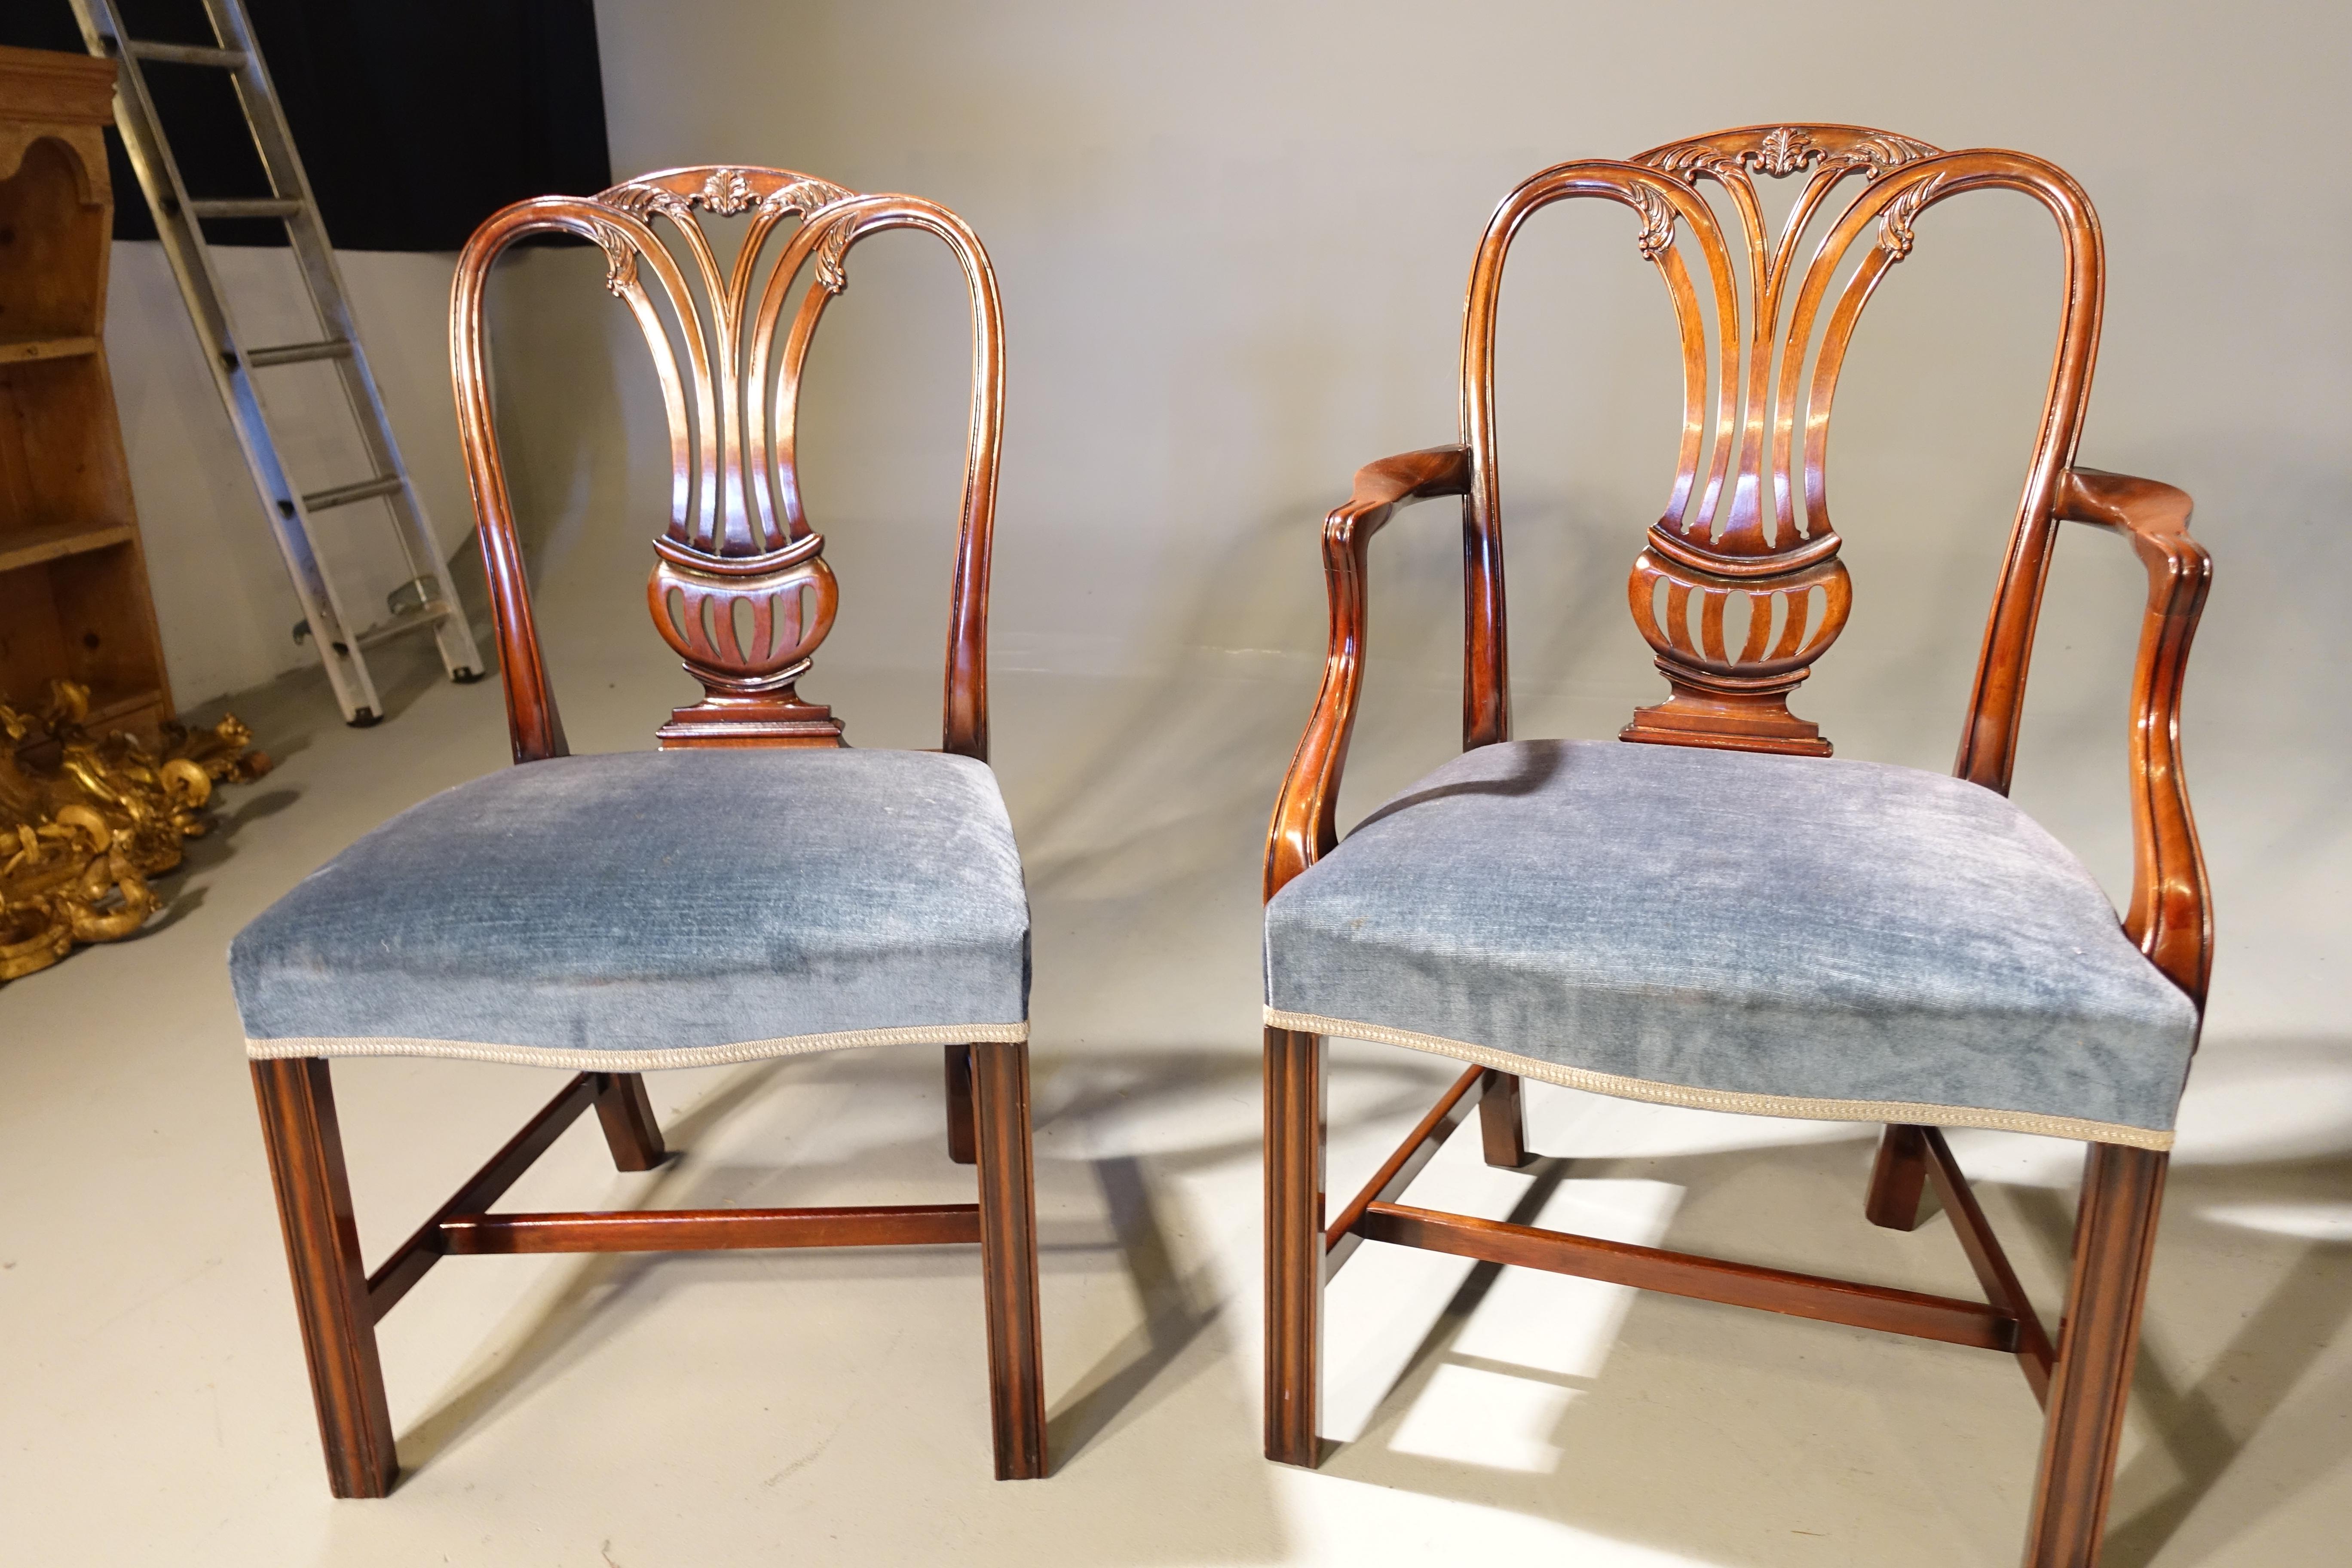 A set of 12 (10+2) elbow chairs of Hepplewhite design. The timbers of quite exceptional quality. Mint overall condition. The triple hooped backs with finely executed carving of foliage and flowers. Square chamfered supports. 
Seat height 19